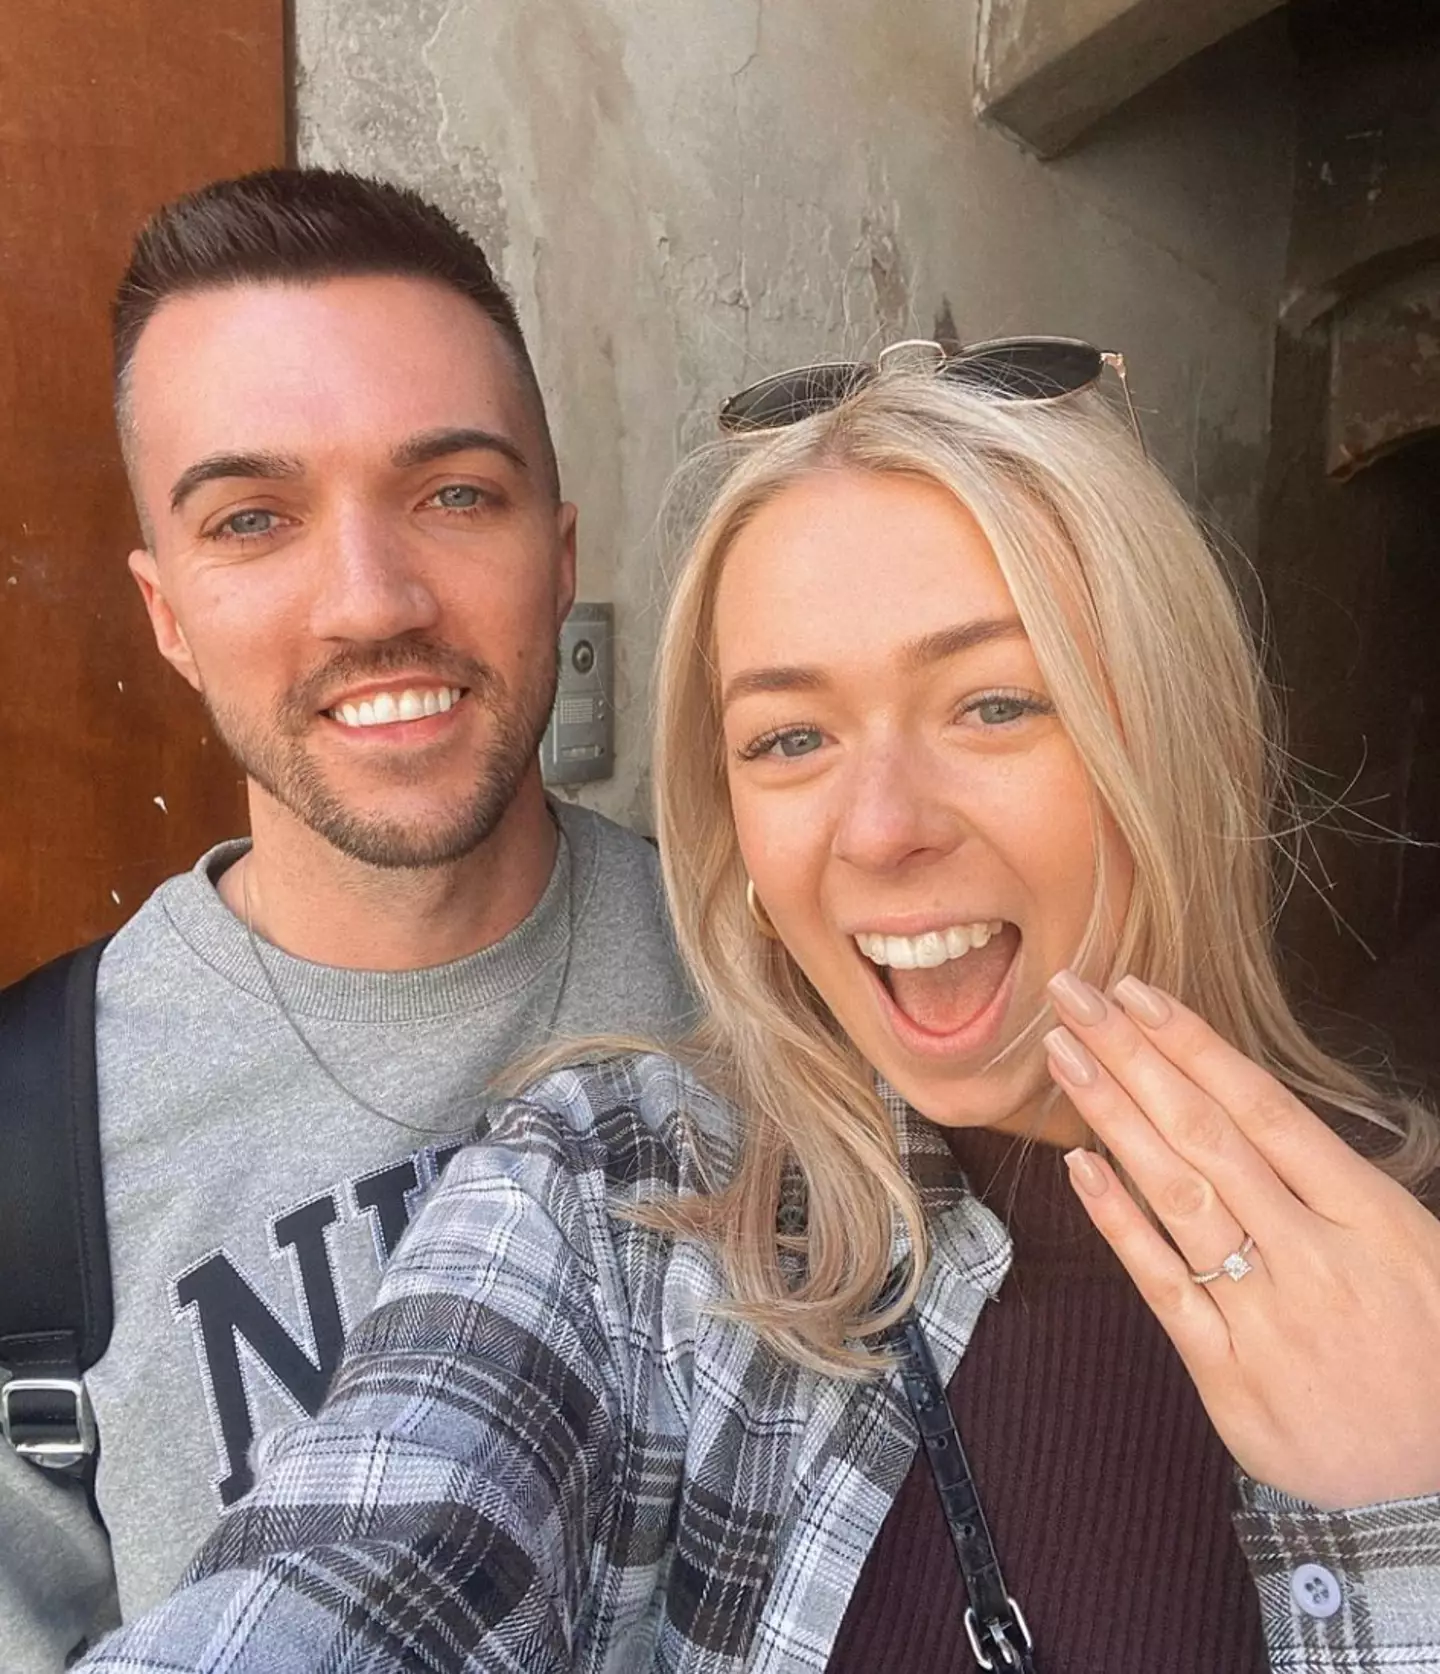 The couple have been engaged for over two years.